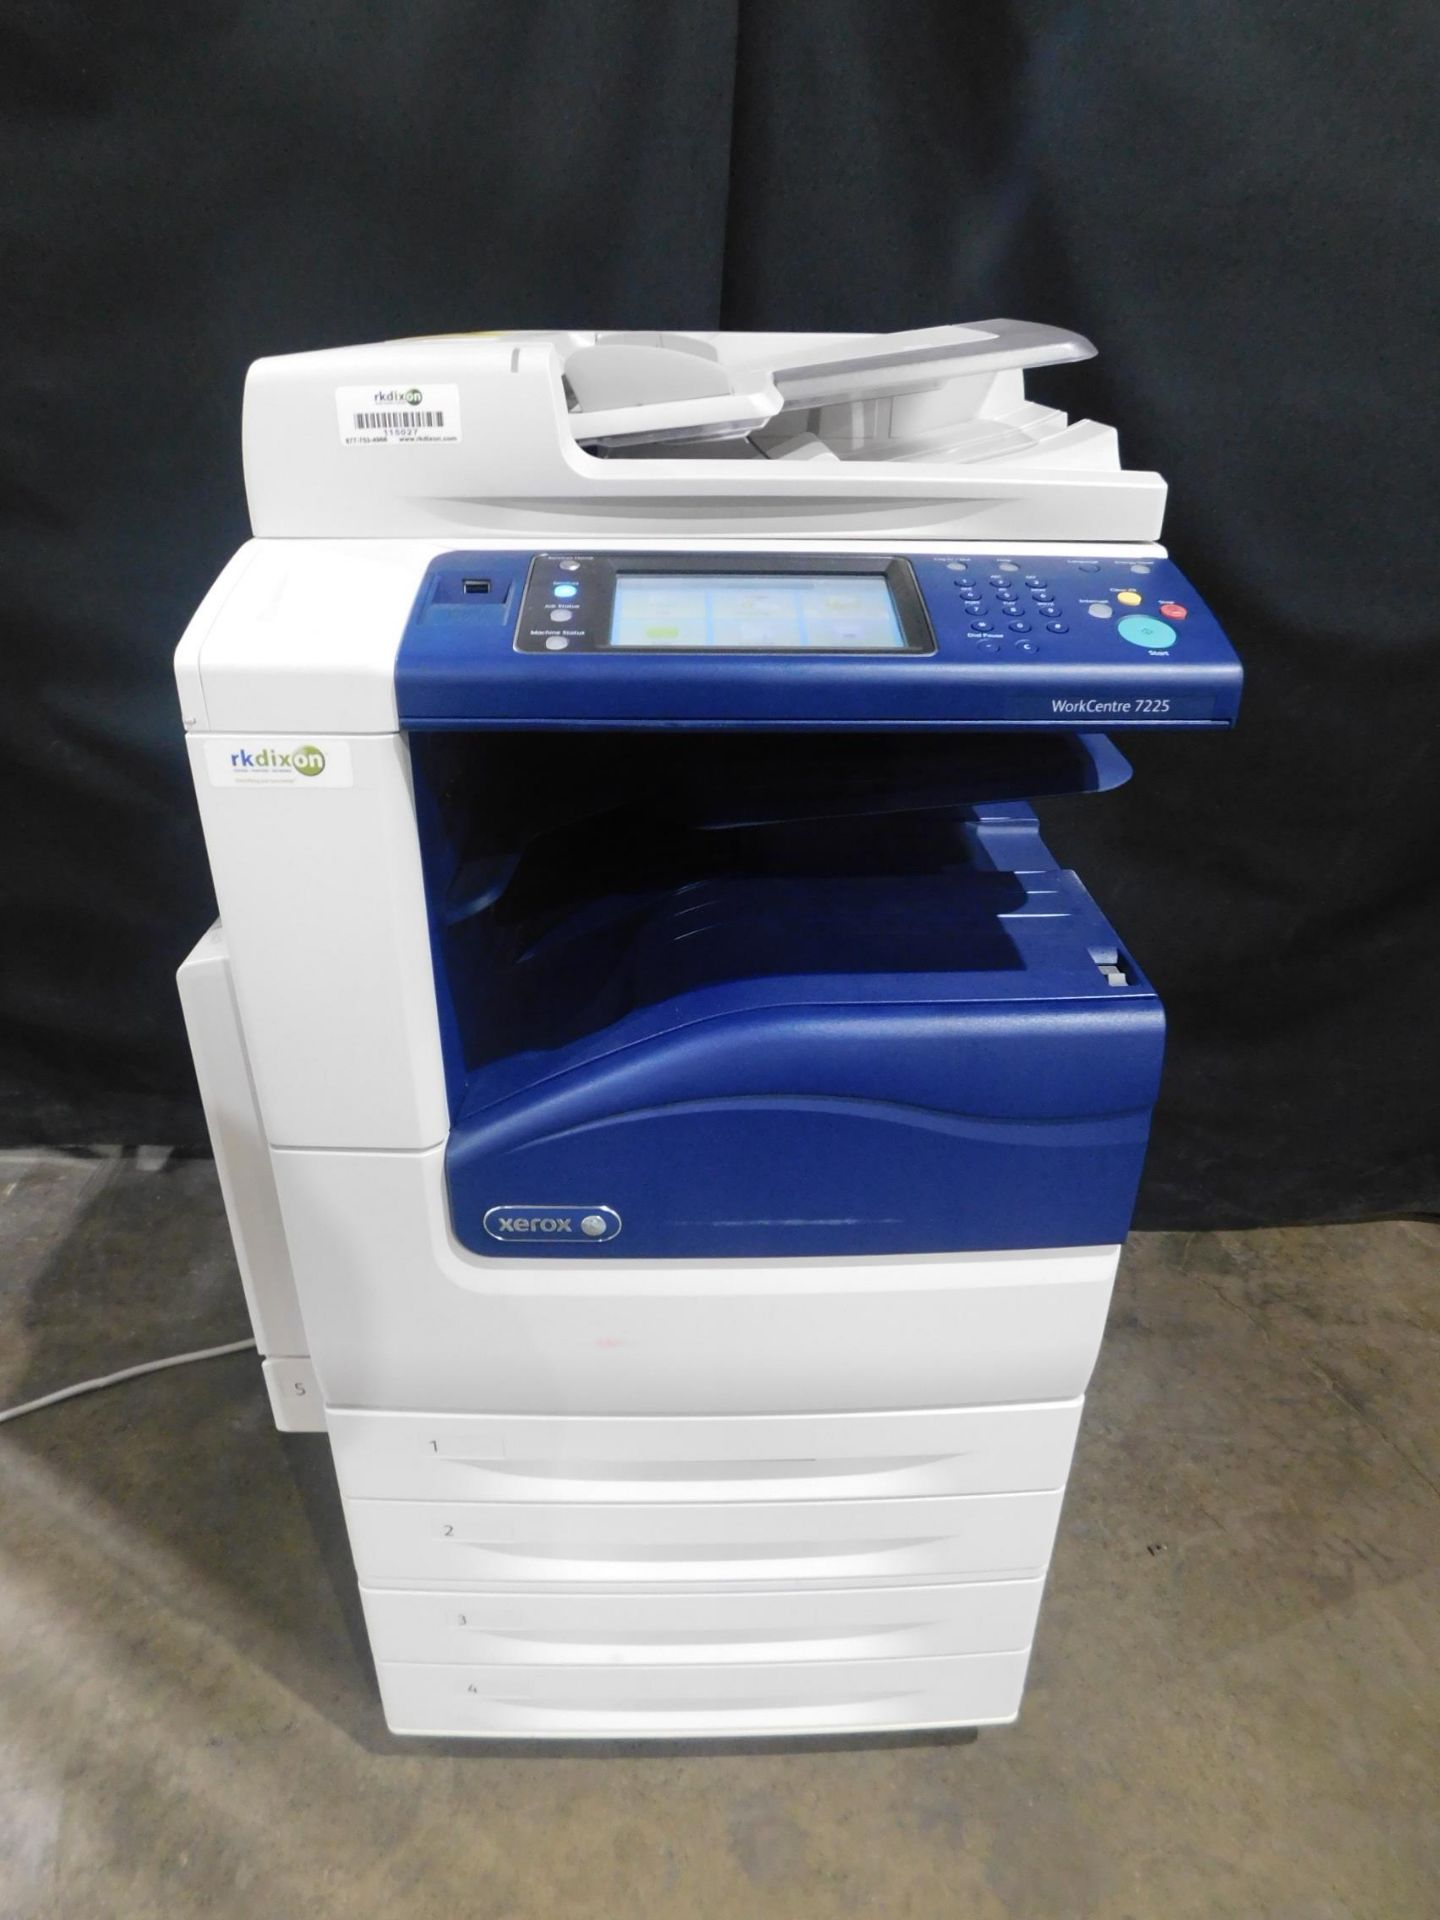 Xerox Work Centre 7225 Multifunction Color Copier/Printer, SN LX5691477, Total Impressions: 106,873,